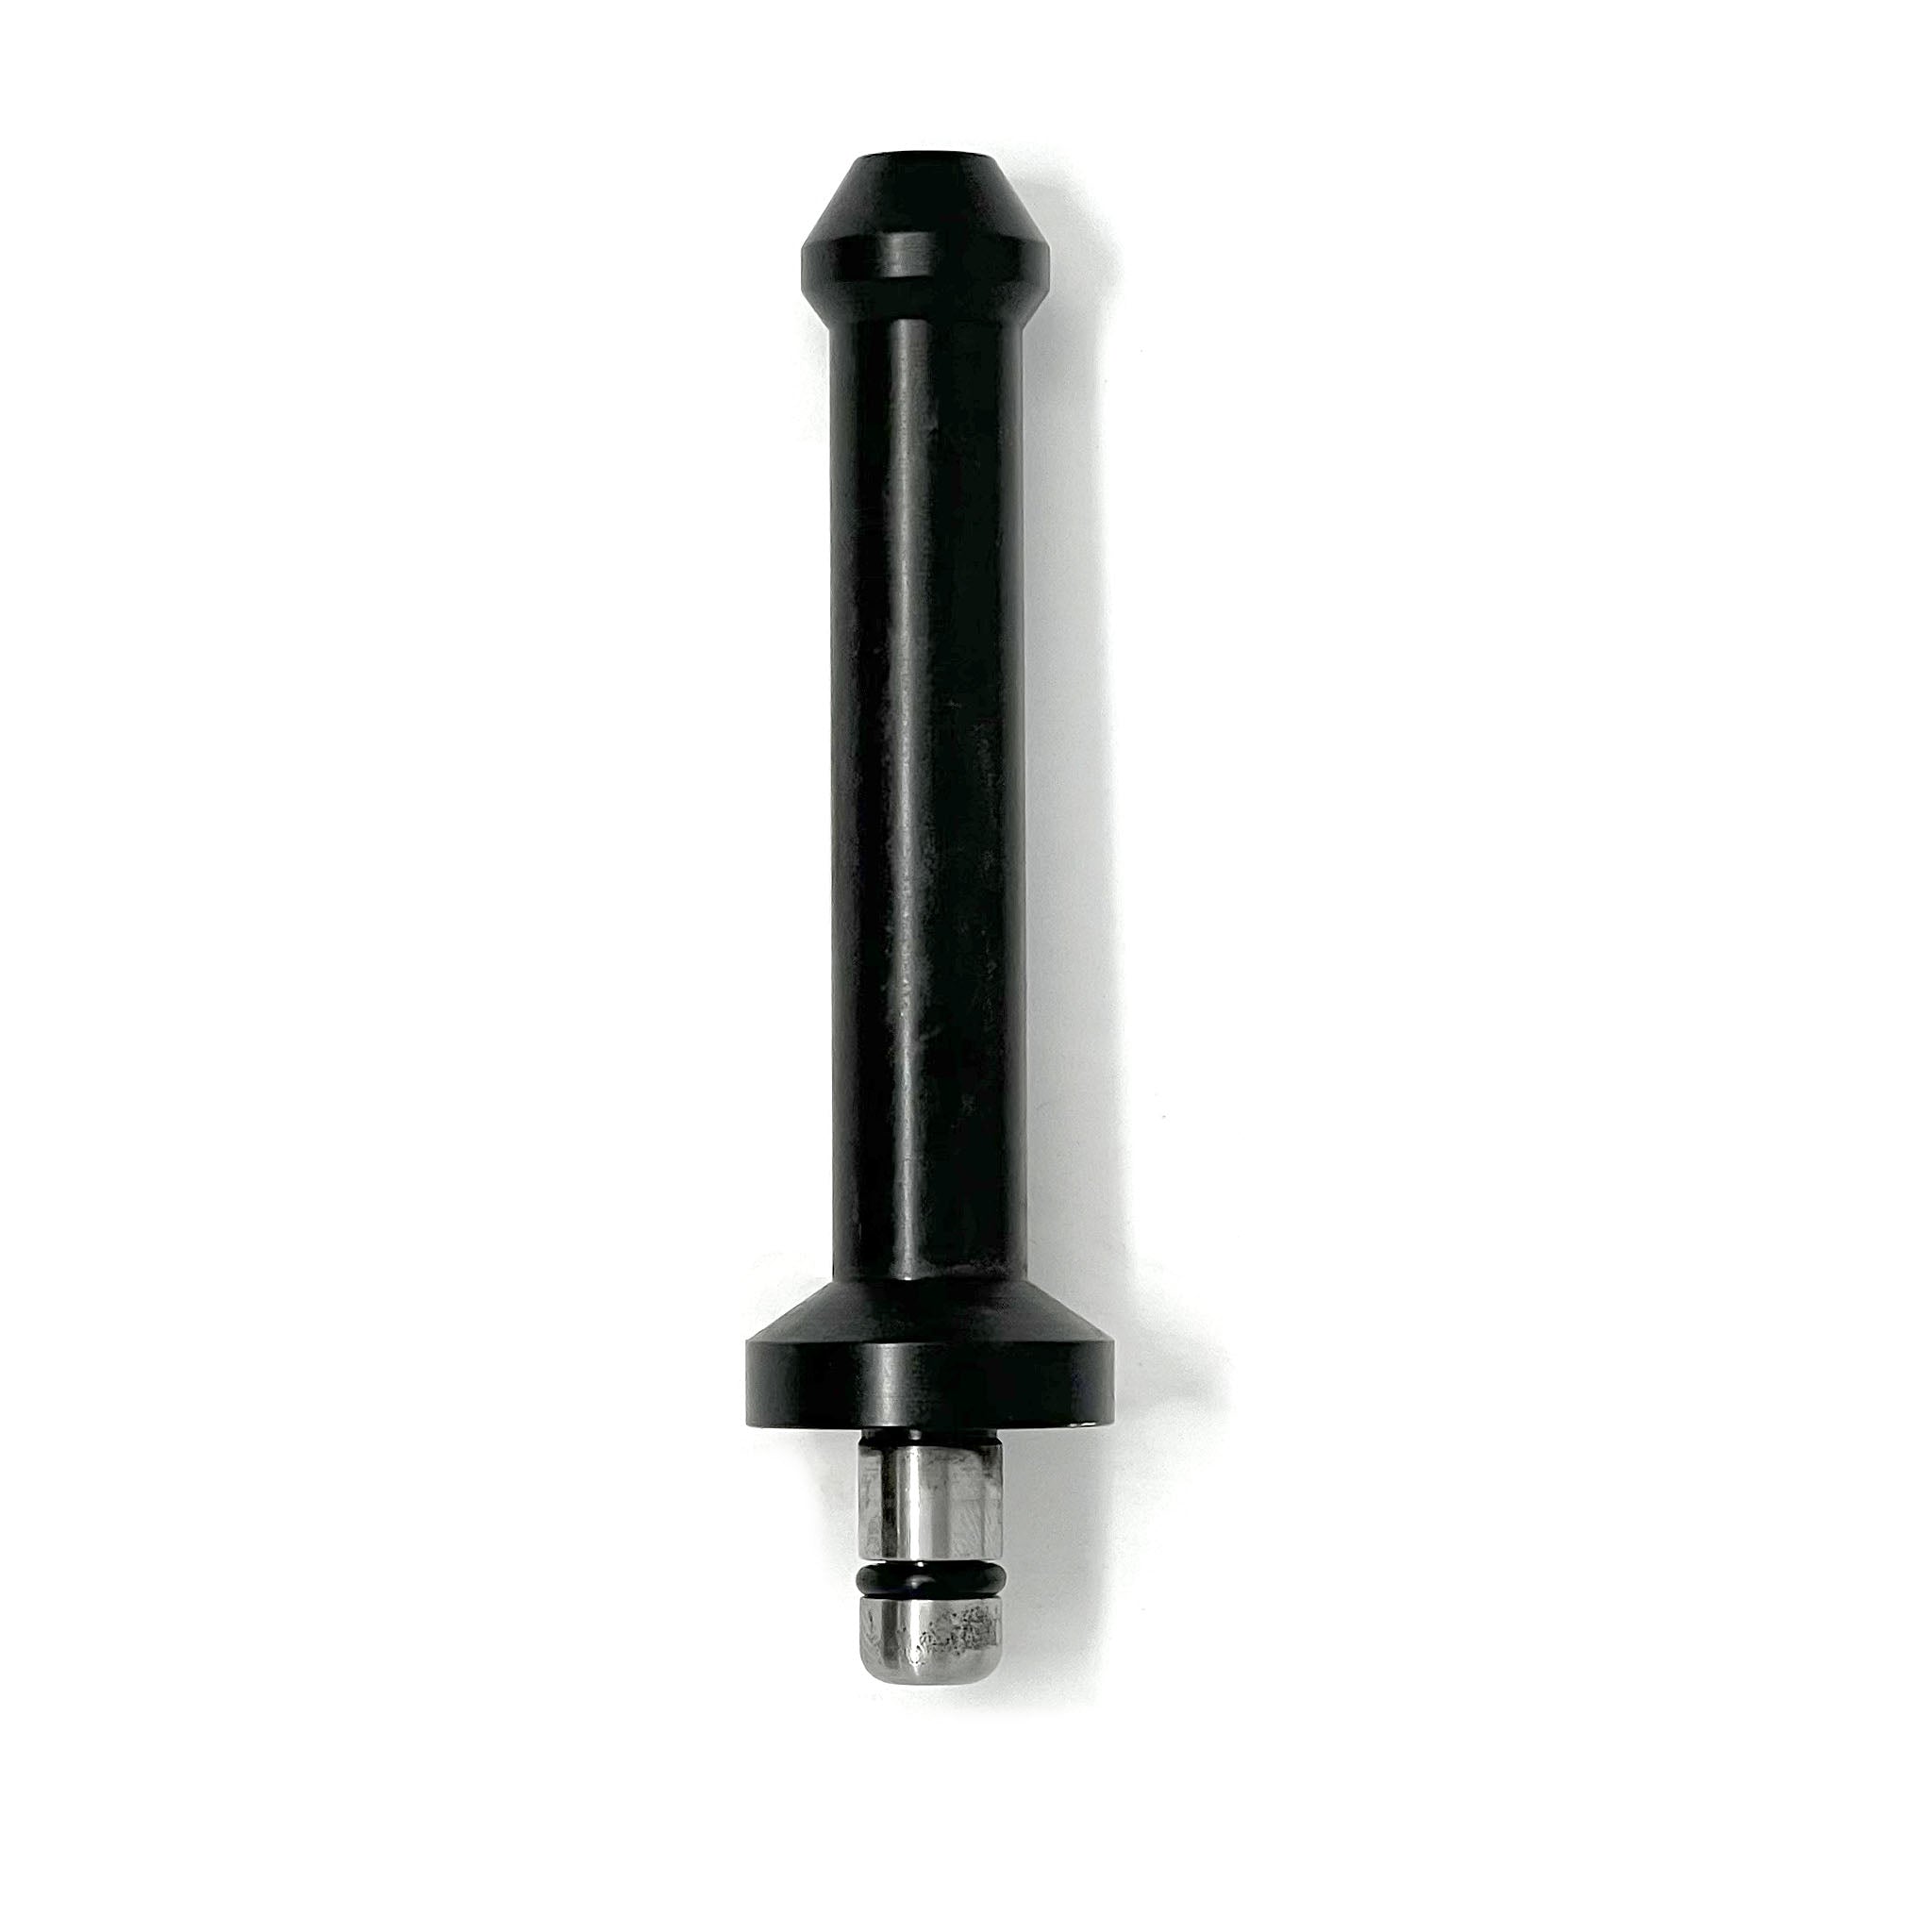 Small Taper Stud (B) for pin plate 3.7" Long for Wheel Balancer